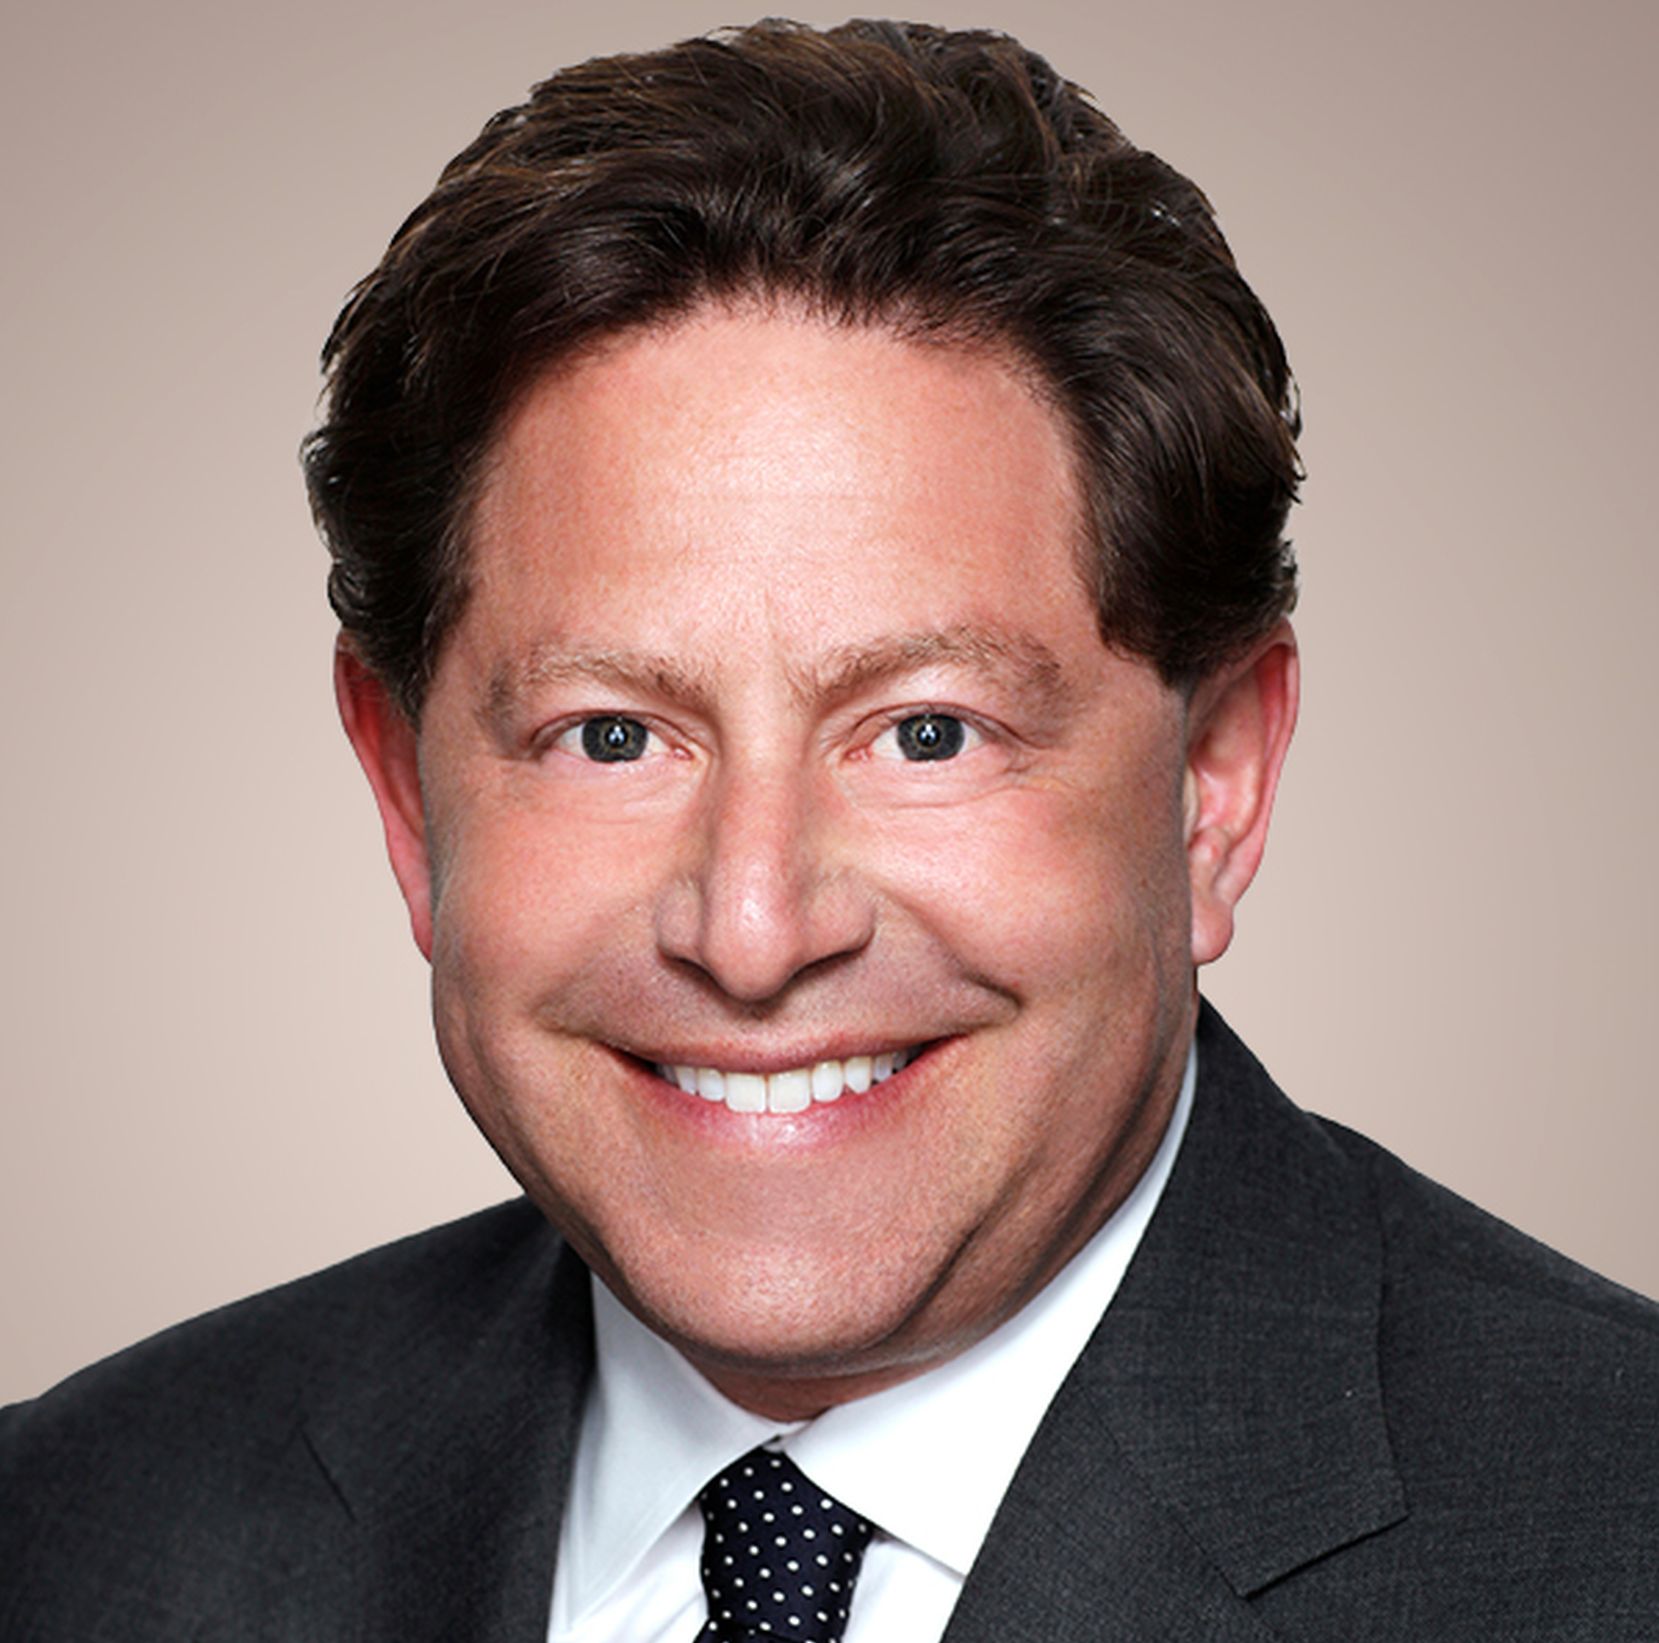 Image for Kotick says he will be "available as needed" at Activision Blizzard "to ensure the very best integration"